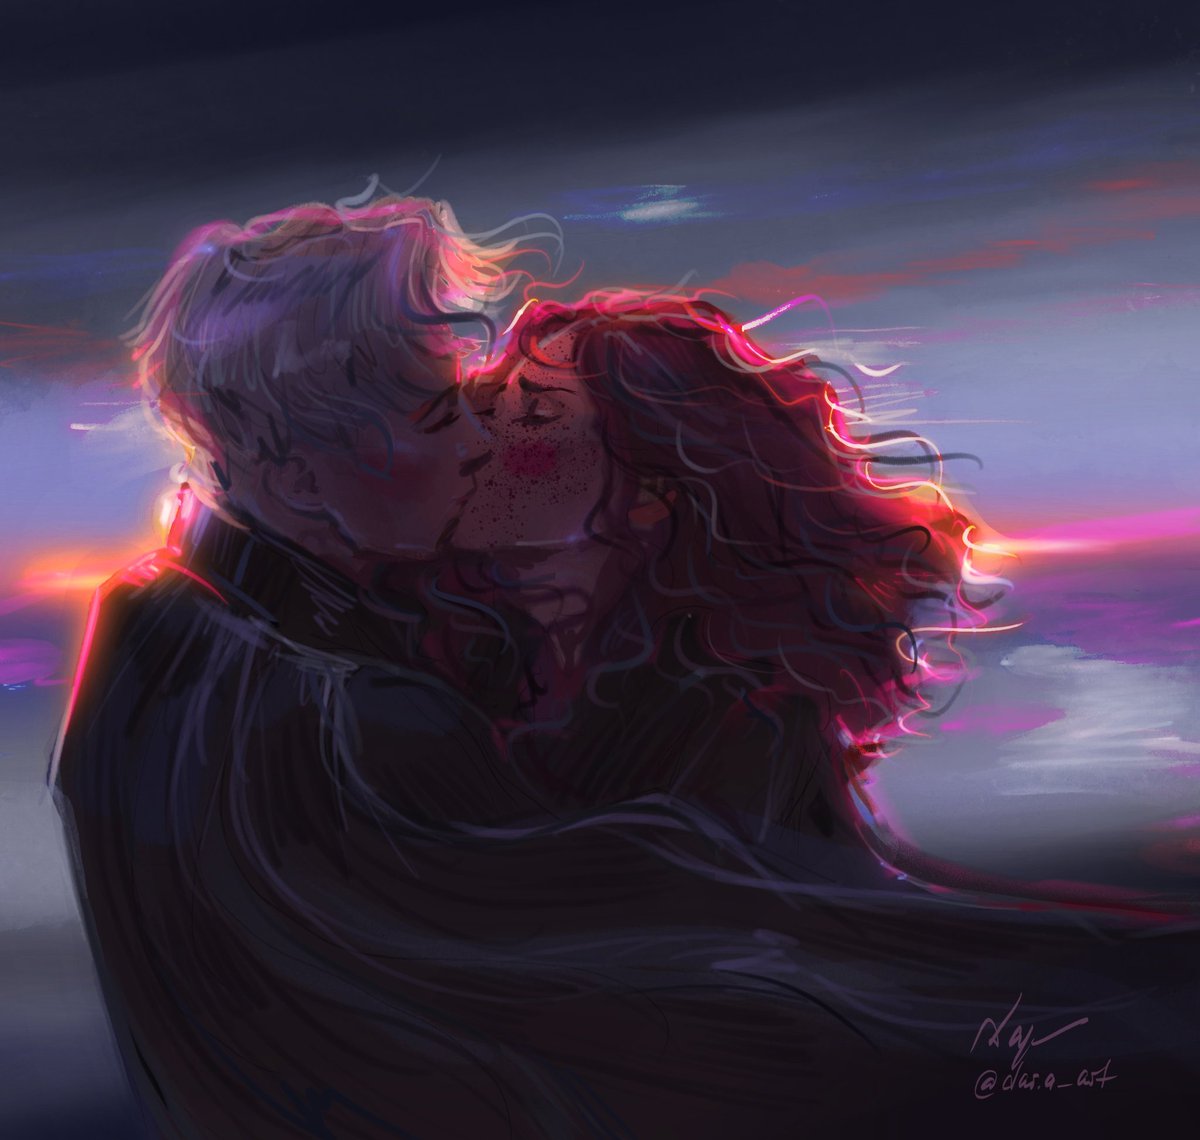 to feel love

fulfilled hopes on the seashore
     
#dramione #hermionegranger #dracomalfoy